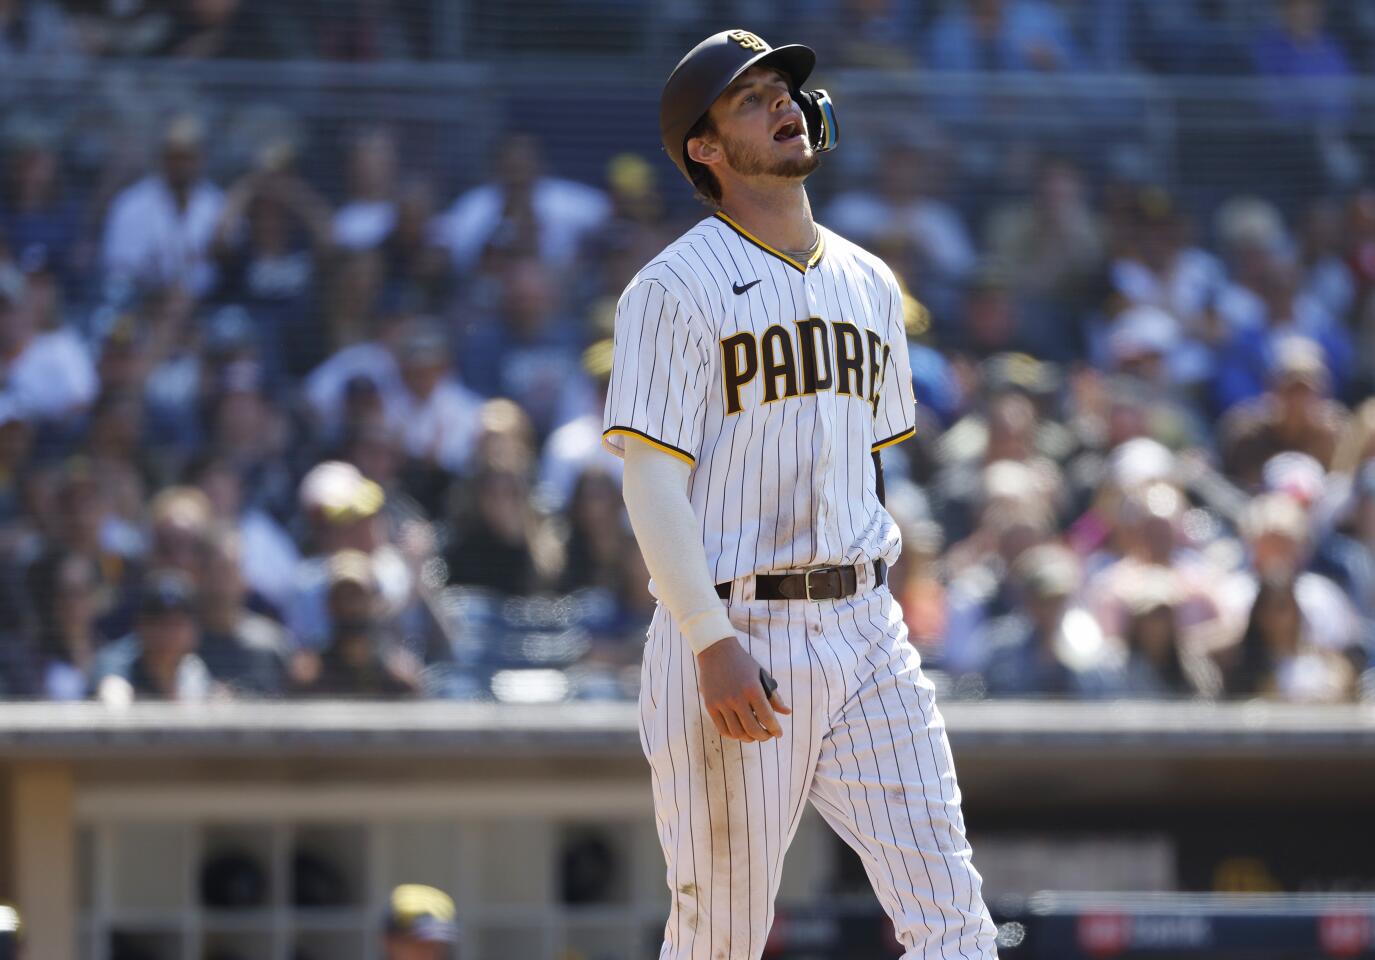 Ranking San Diego Padres uniforms from worst to best